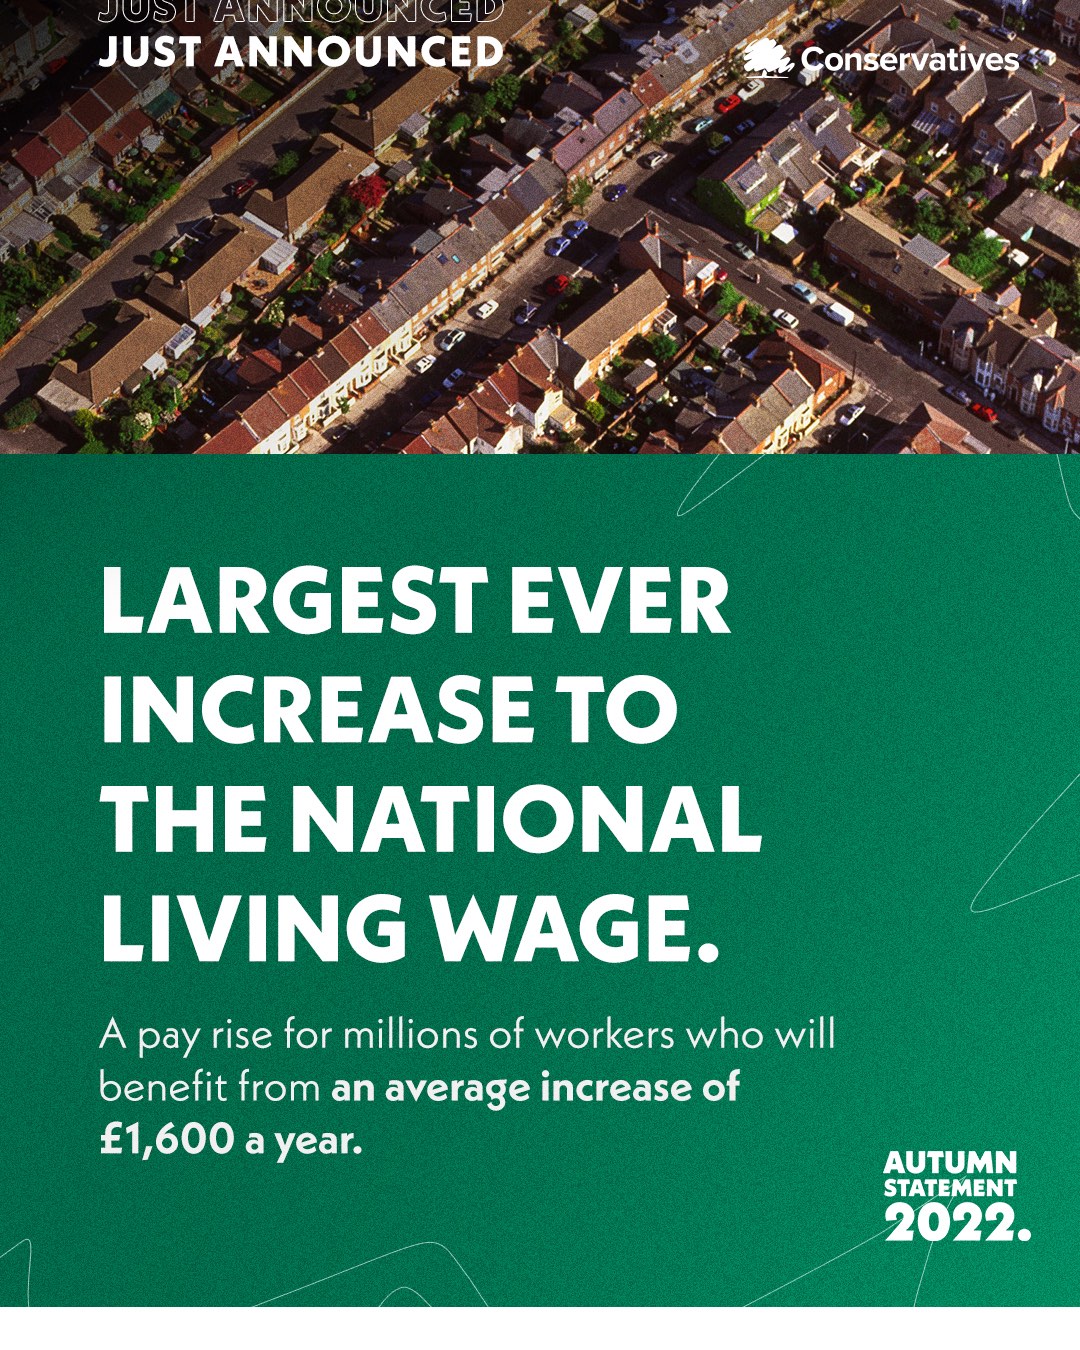 The largest ever increase to the National Living Wage